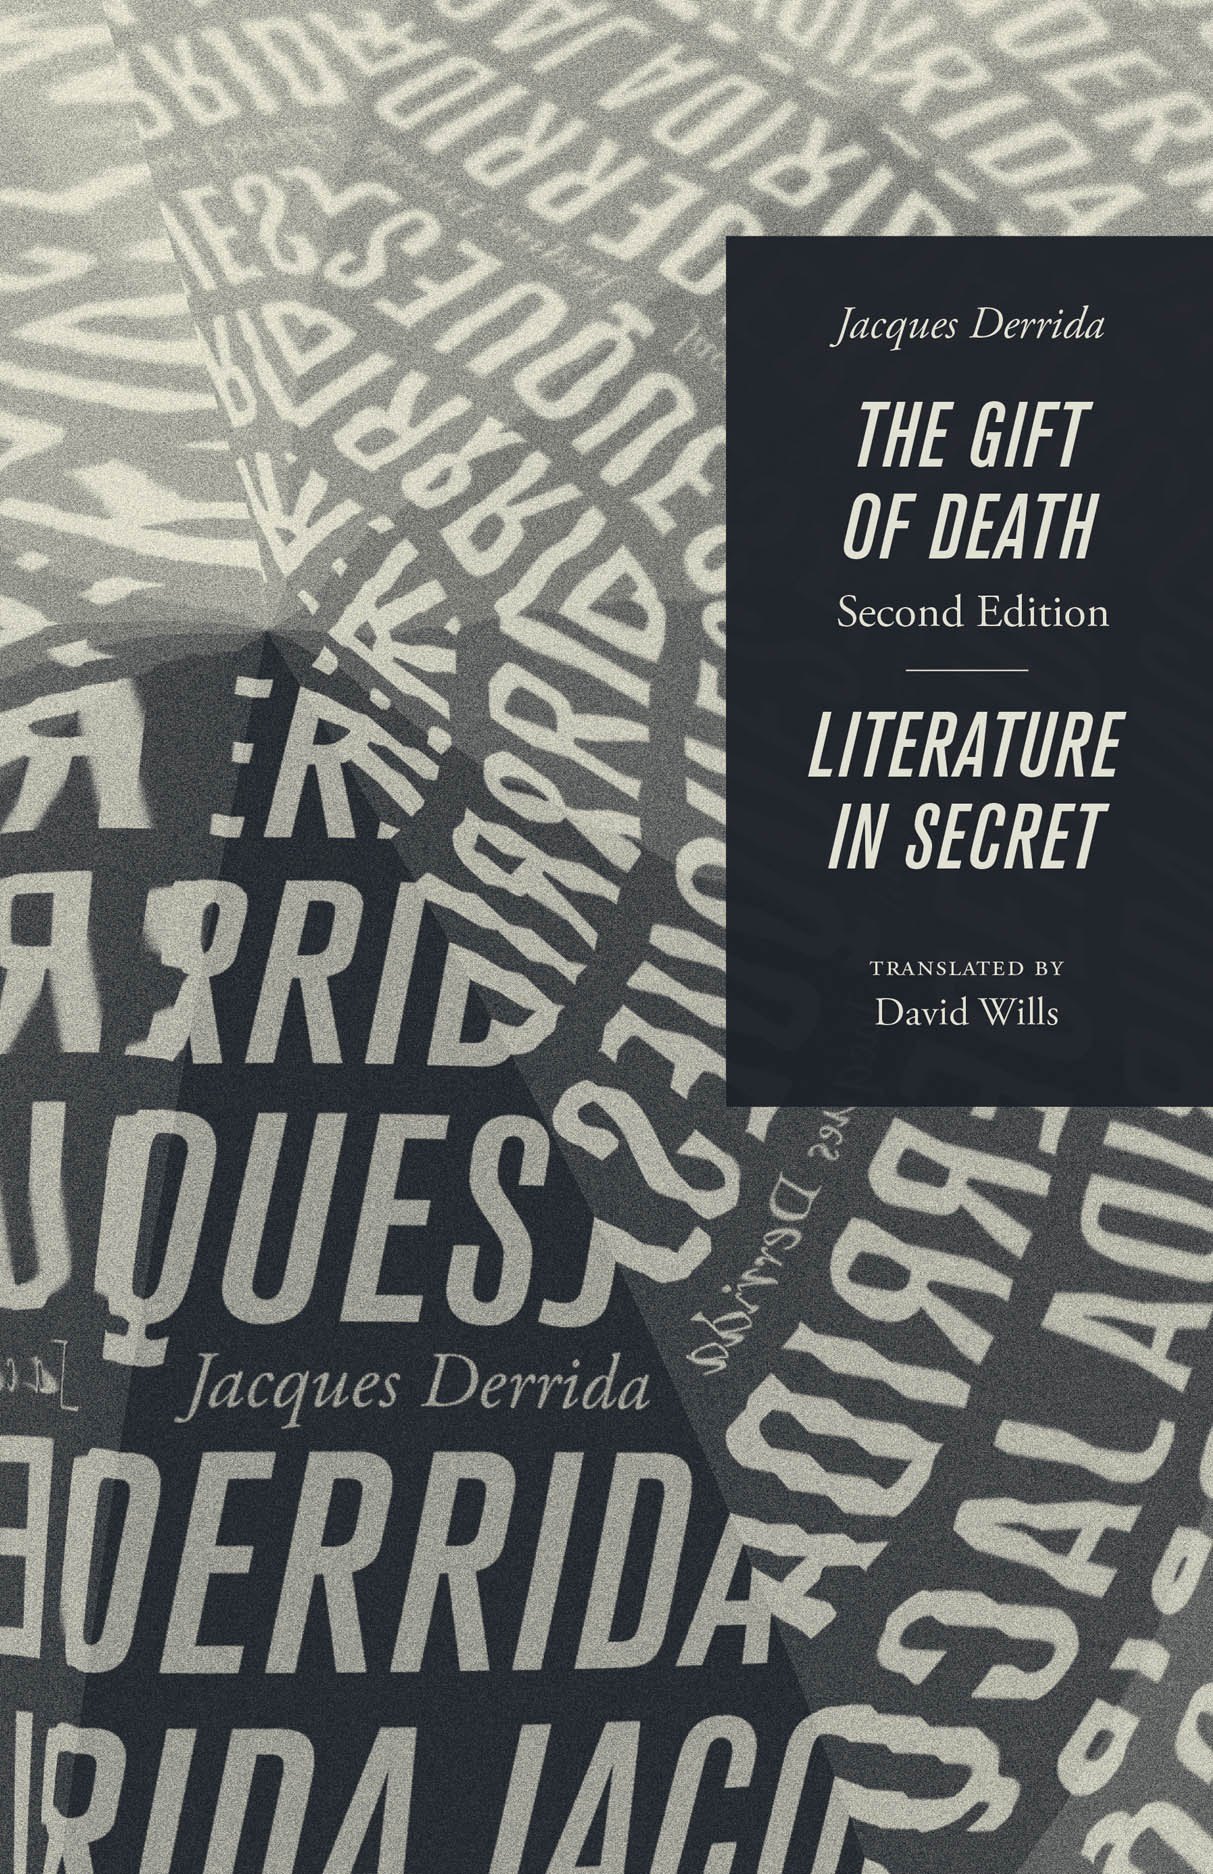 The Gift of Death by Jacques Derrida